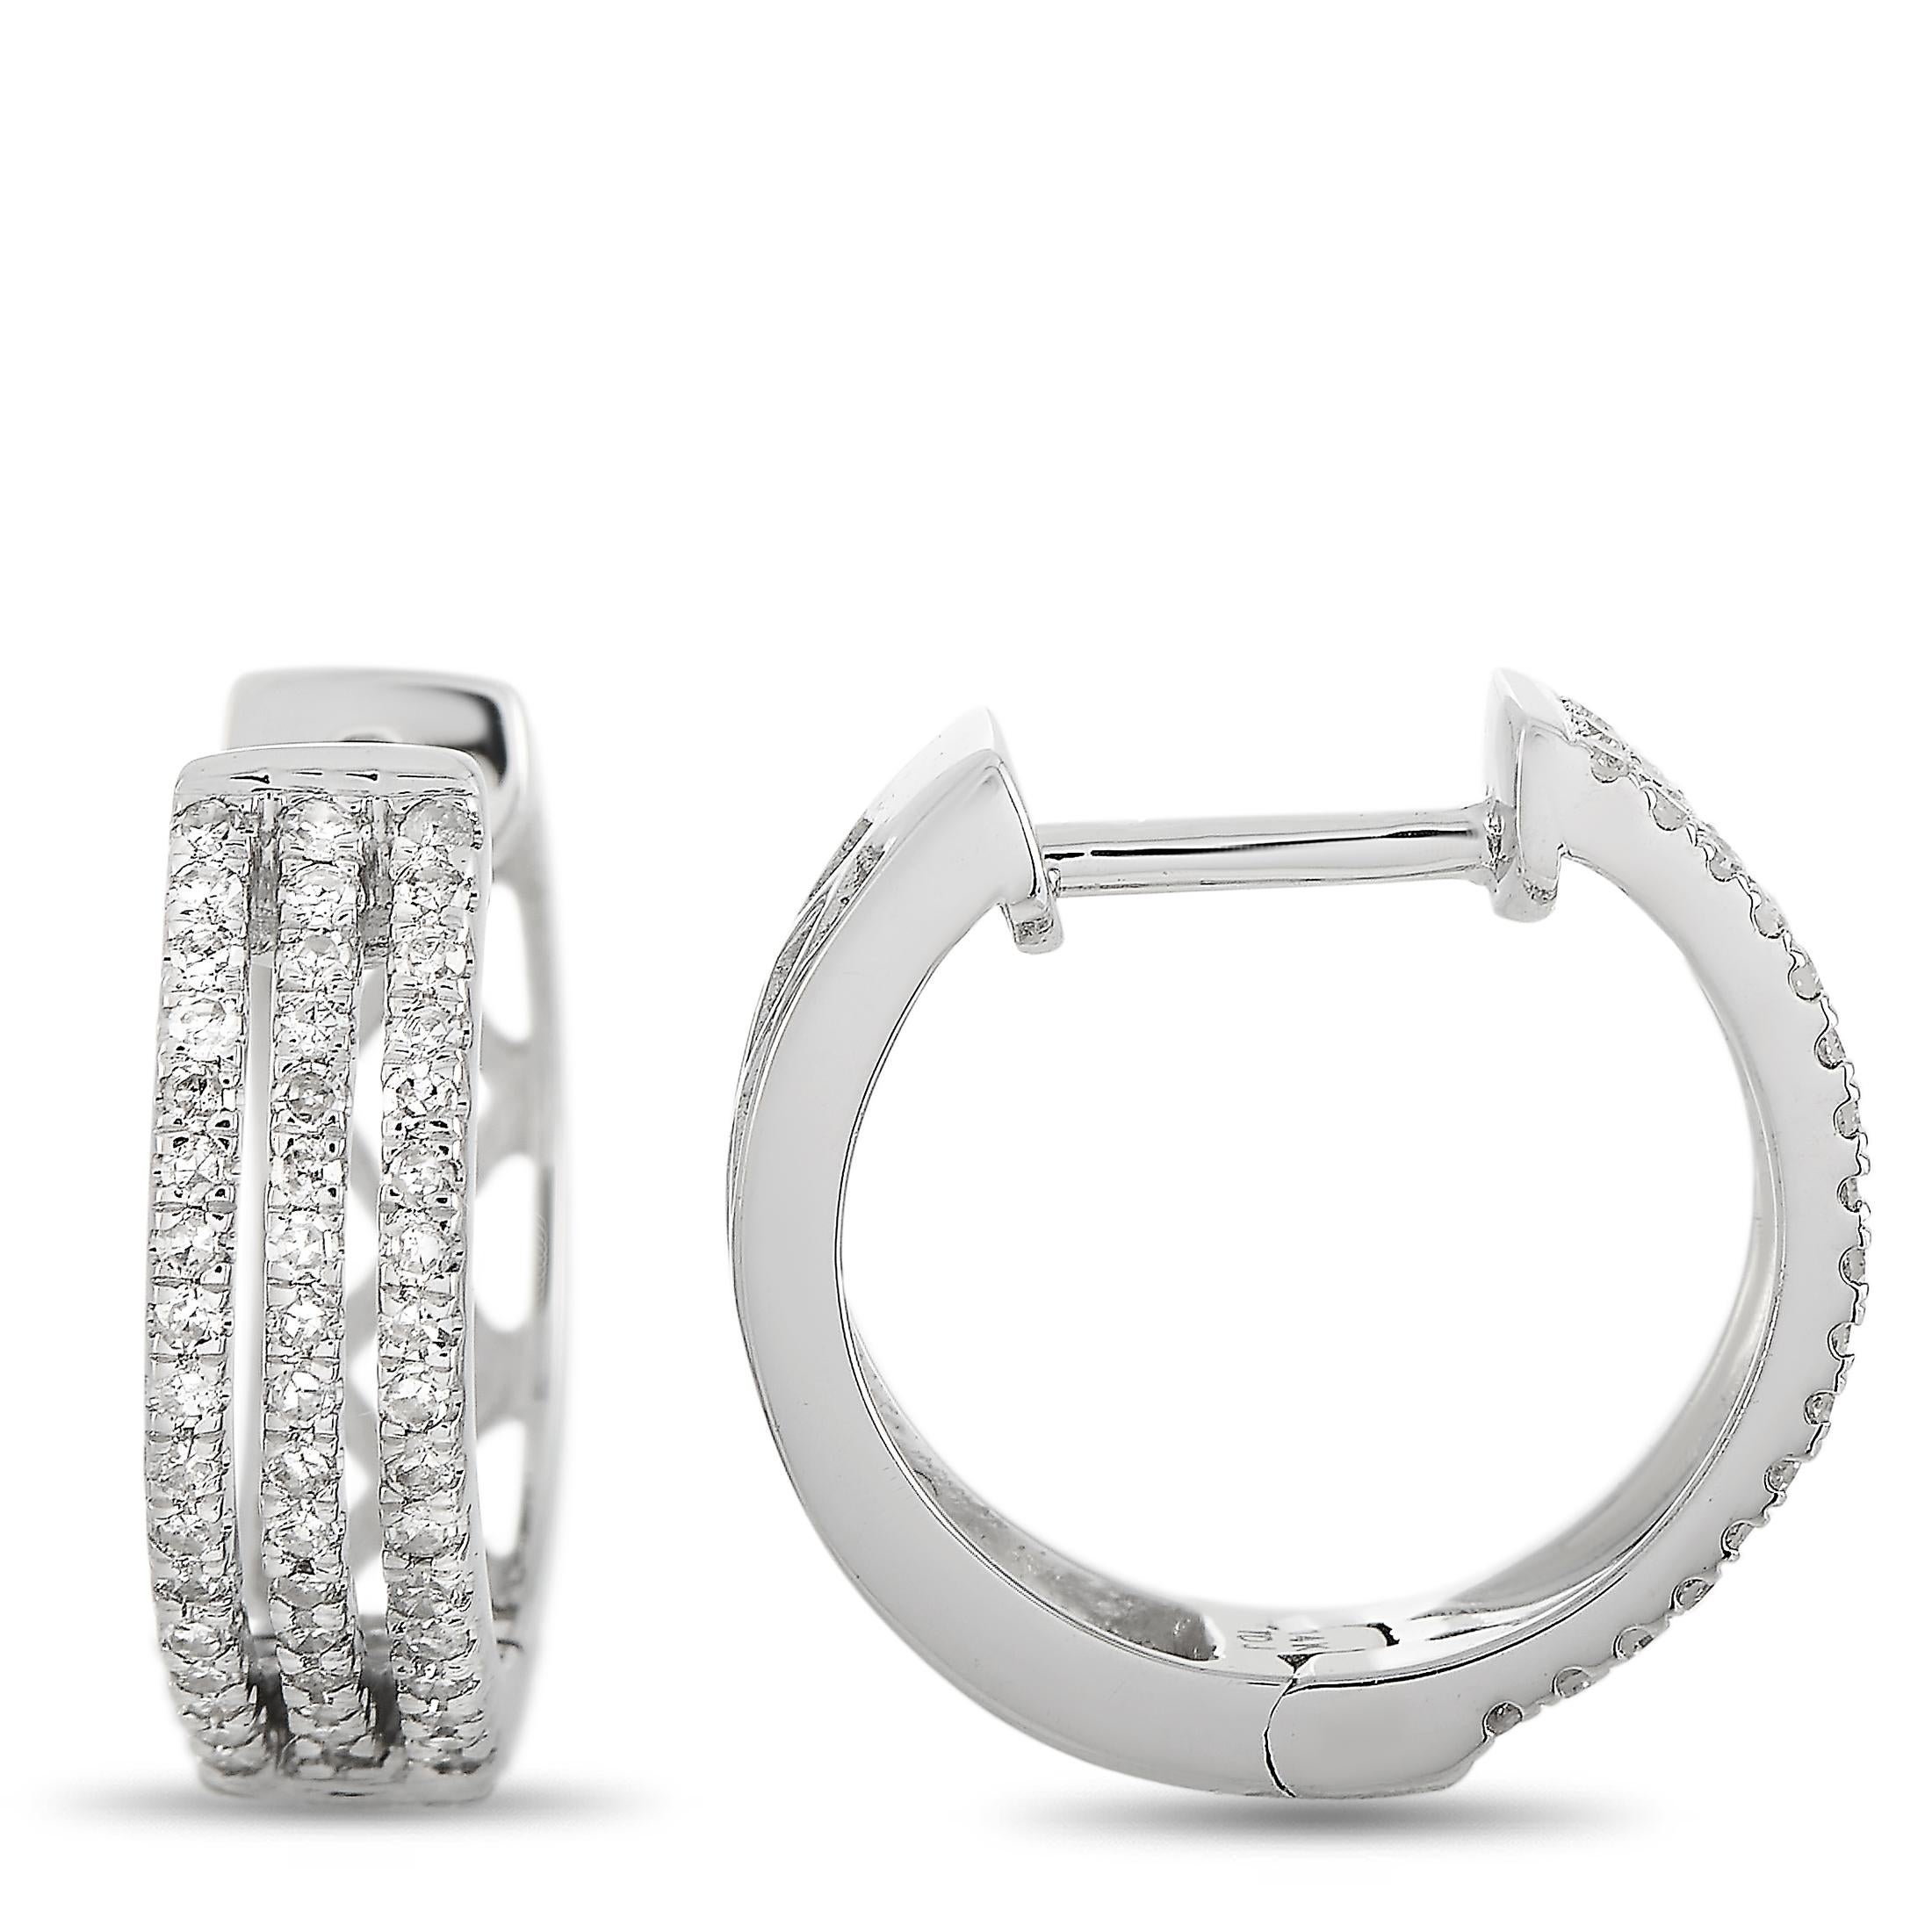 These LB Exclusive hoop earrings are made of 14K white gold and embellished with diamonds that amount to 0.33 carats. The earrings measure 0.50” in length and 0.20” in width, and each of the two weighs 1.15 grams.
 
 The pair is offered in brand